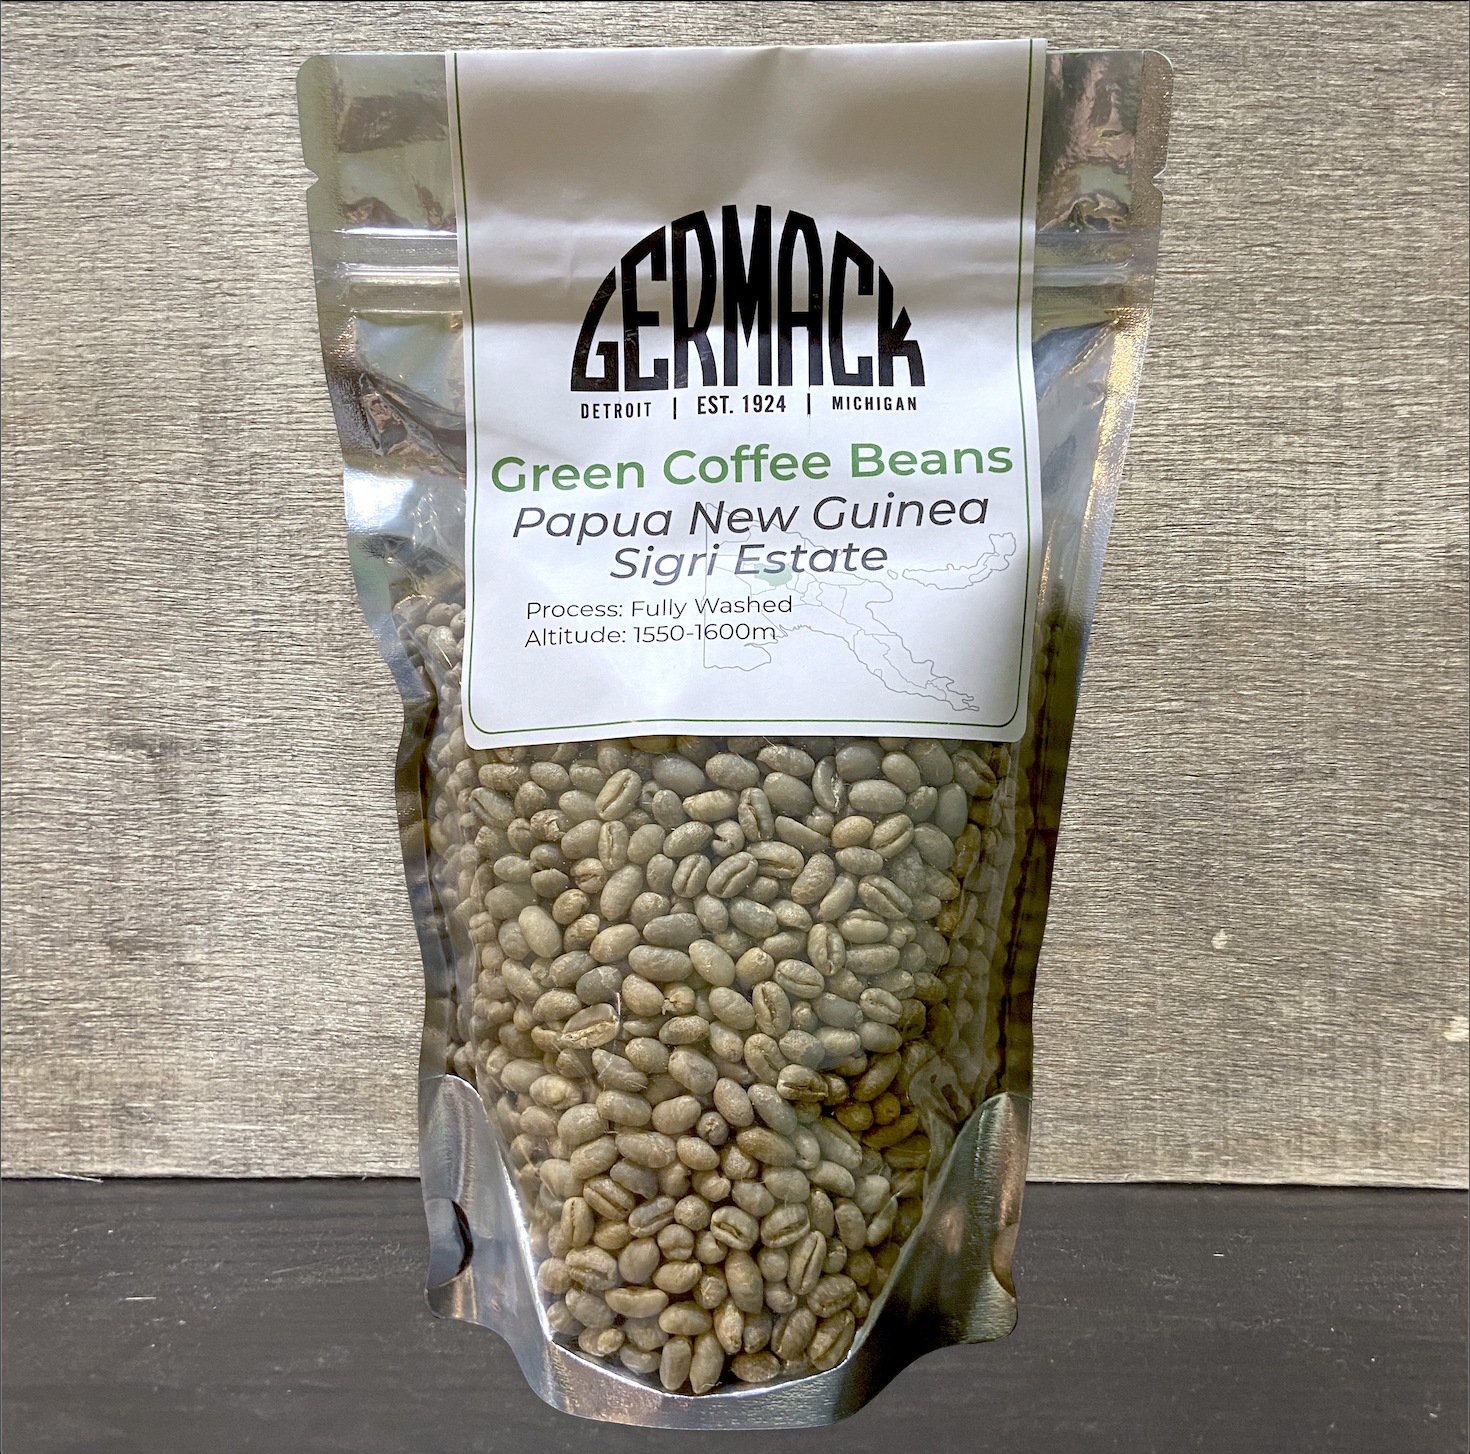 Picture Germack Green Coffee Beans (1 lb) - Papua New Guinea Sigri Estate